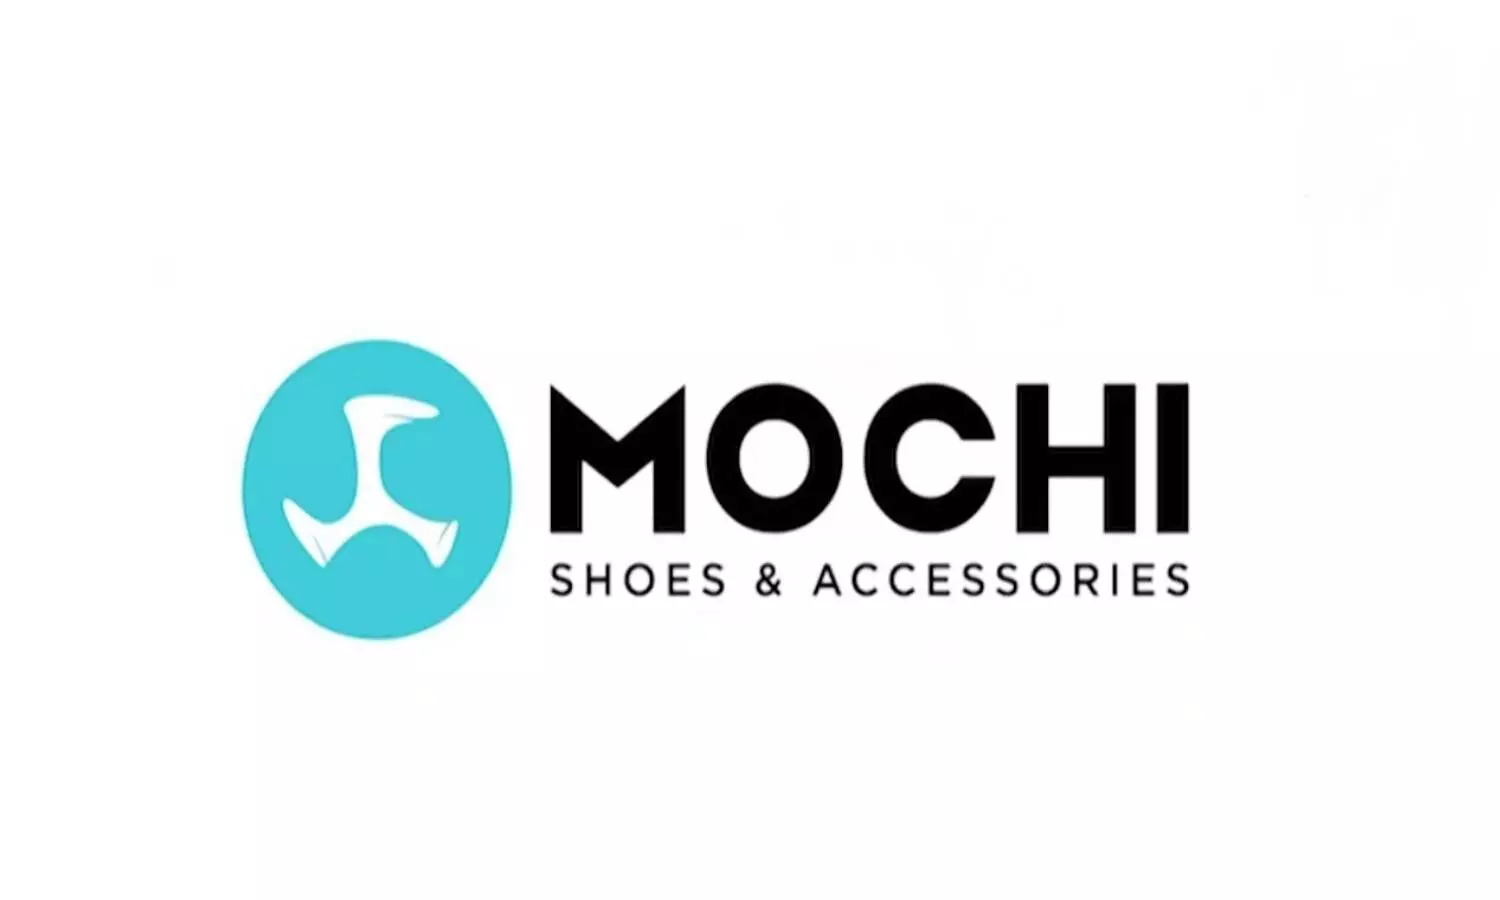 Footwear brand Mochi to boast new look to its stores